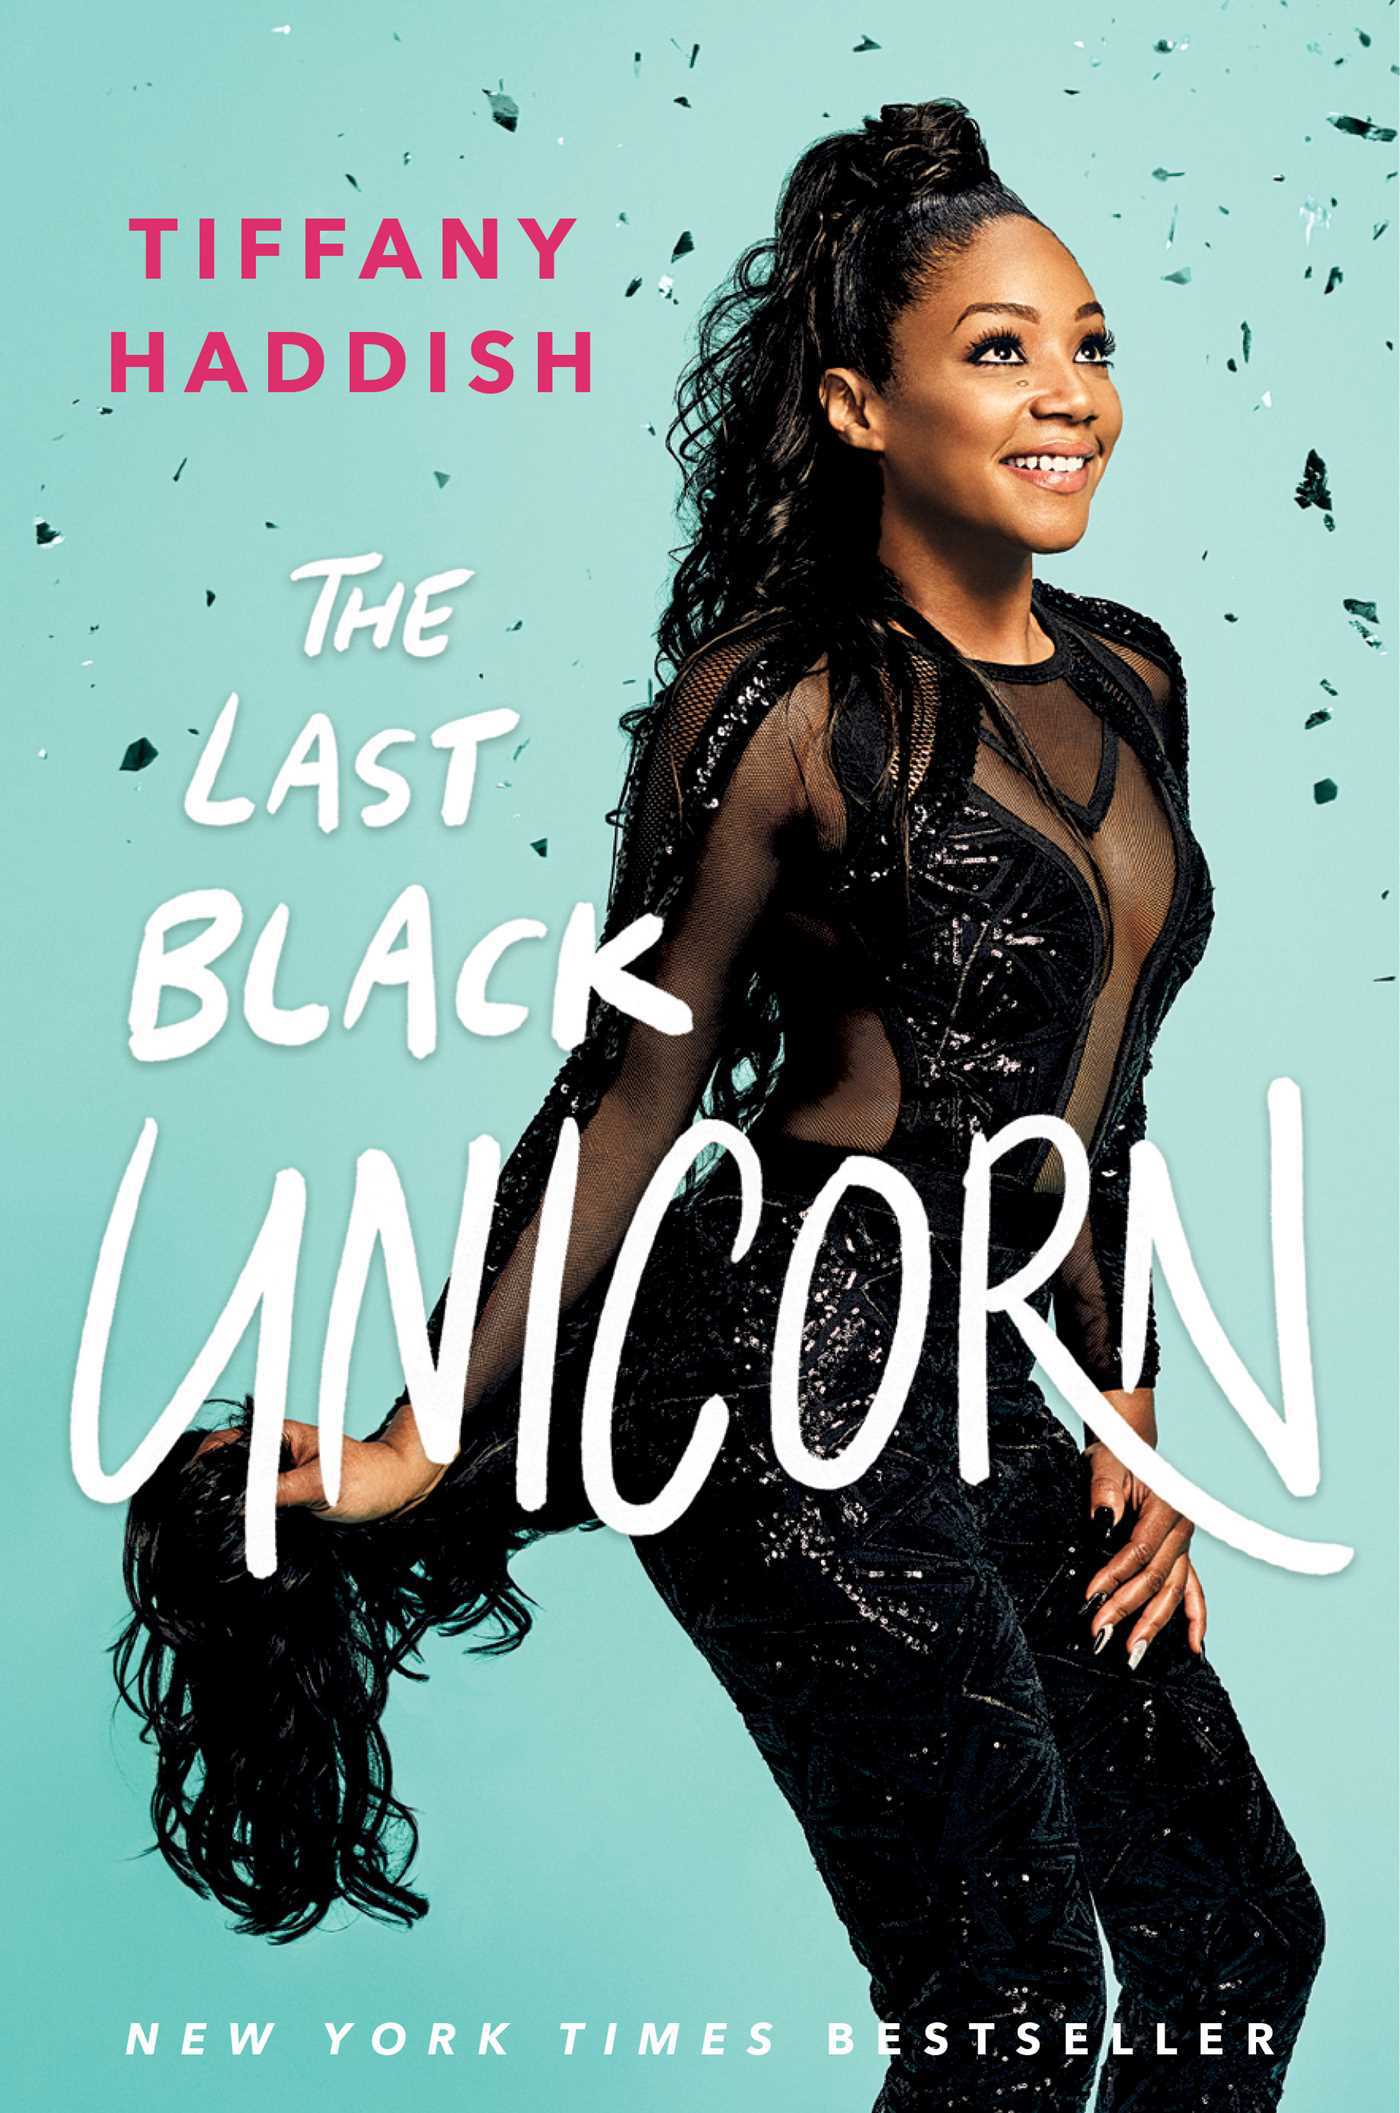 Books by celebrities that taught us something_The Last Black Unicorn